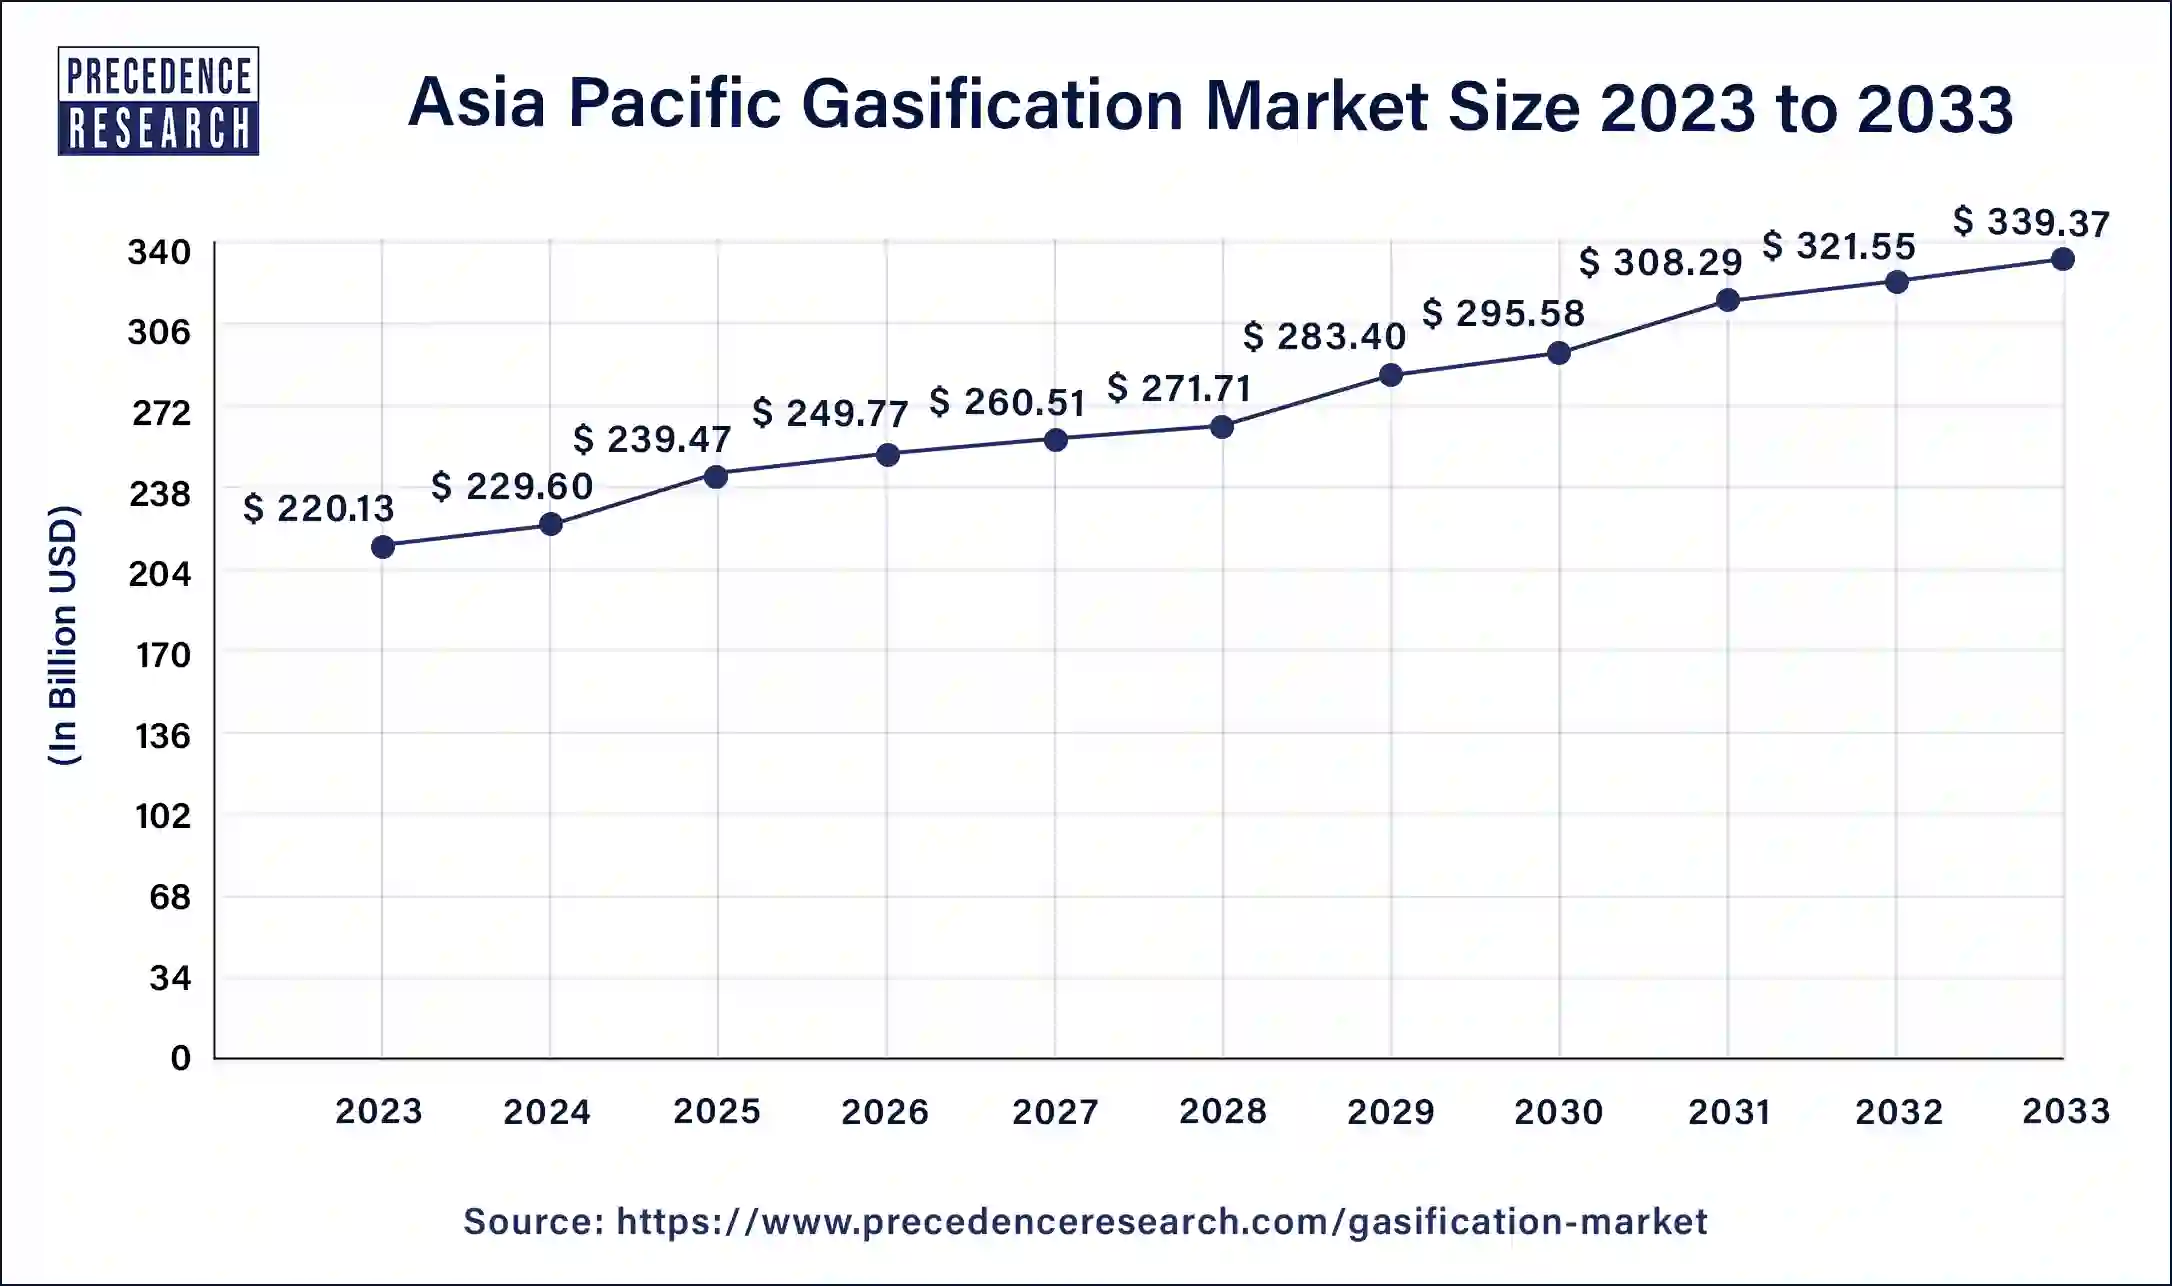 Asia Pacific Gasification Market Size 2024 to 2033